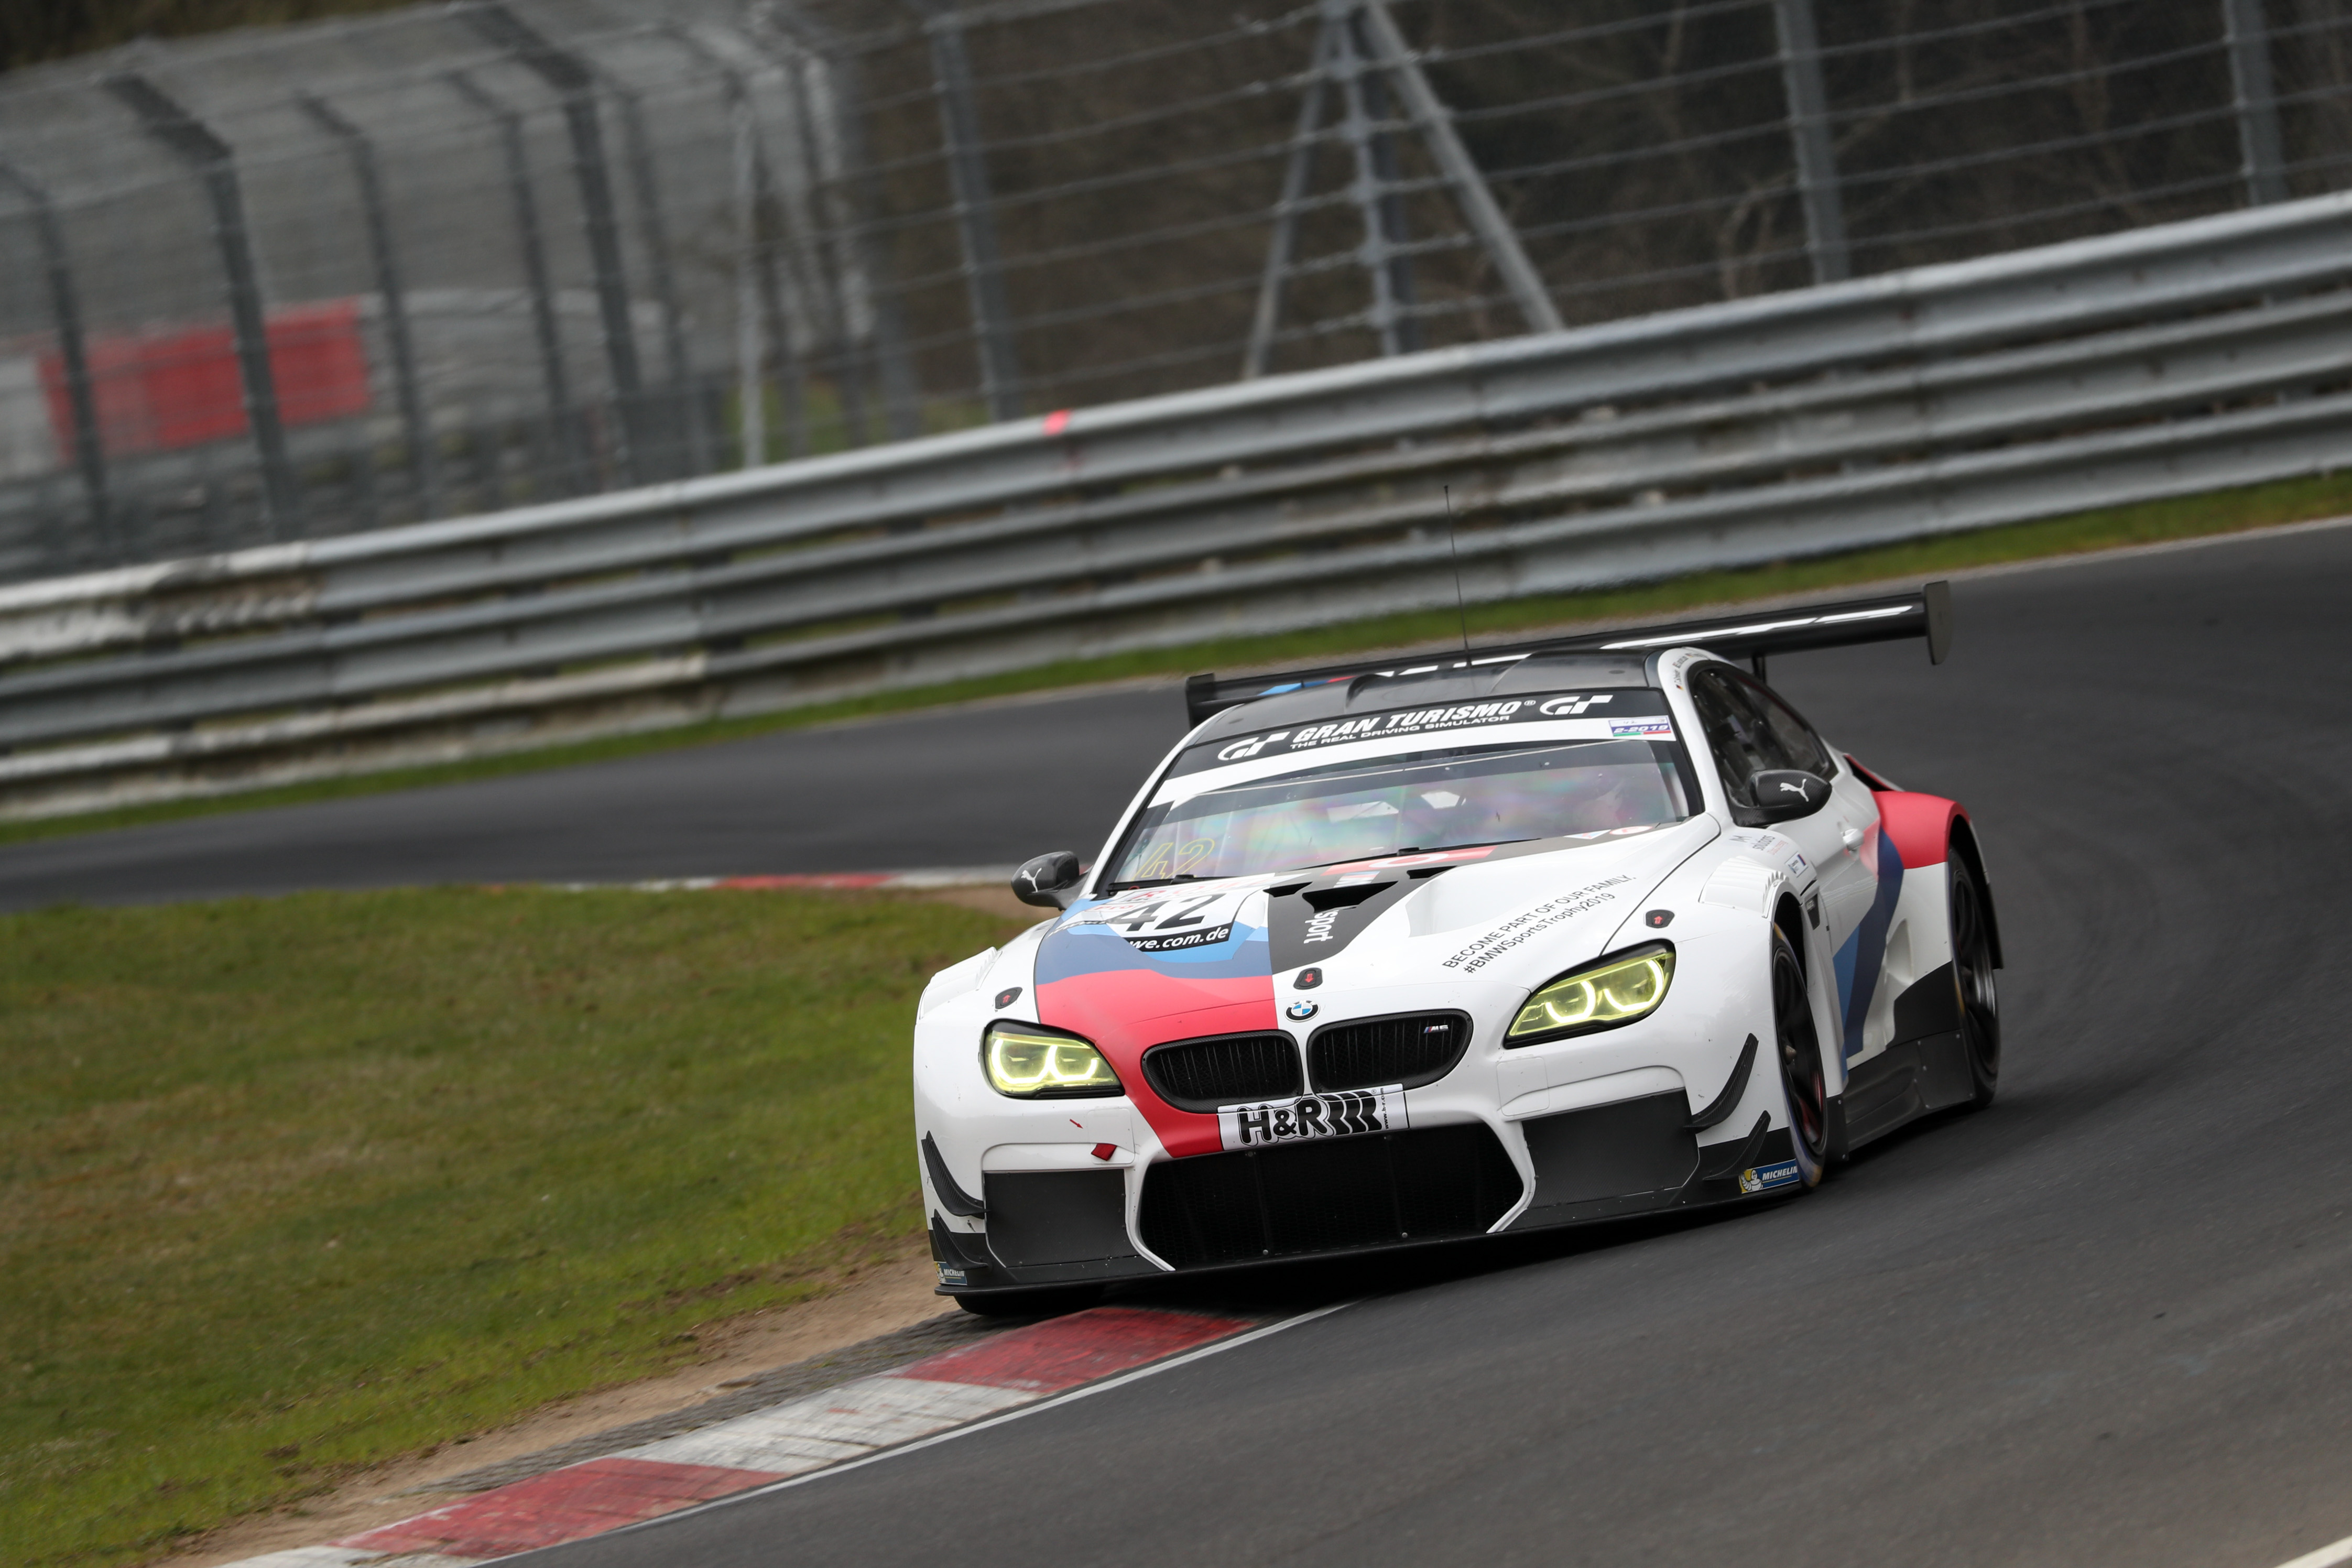 Nick Yelloly Returns To Nürburgring To Take On Green Hell With BMW Team Schnitzer